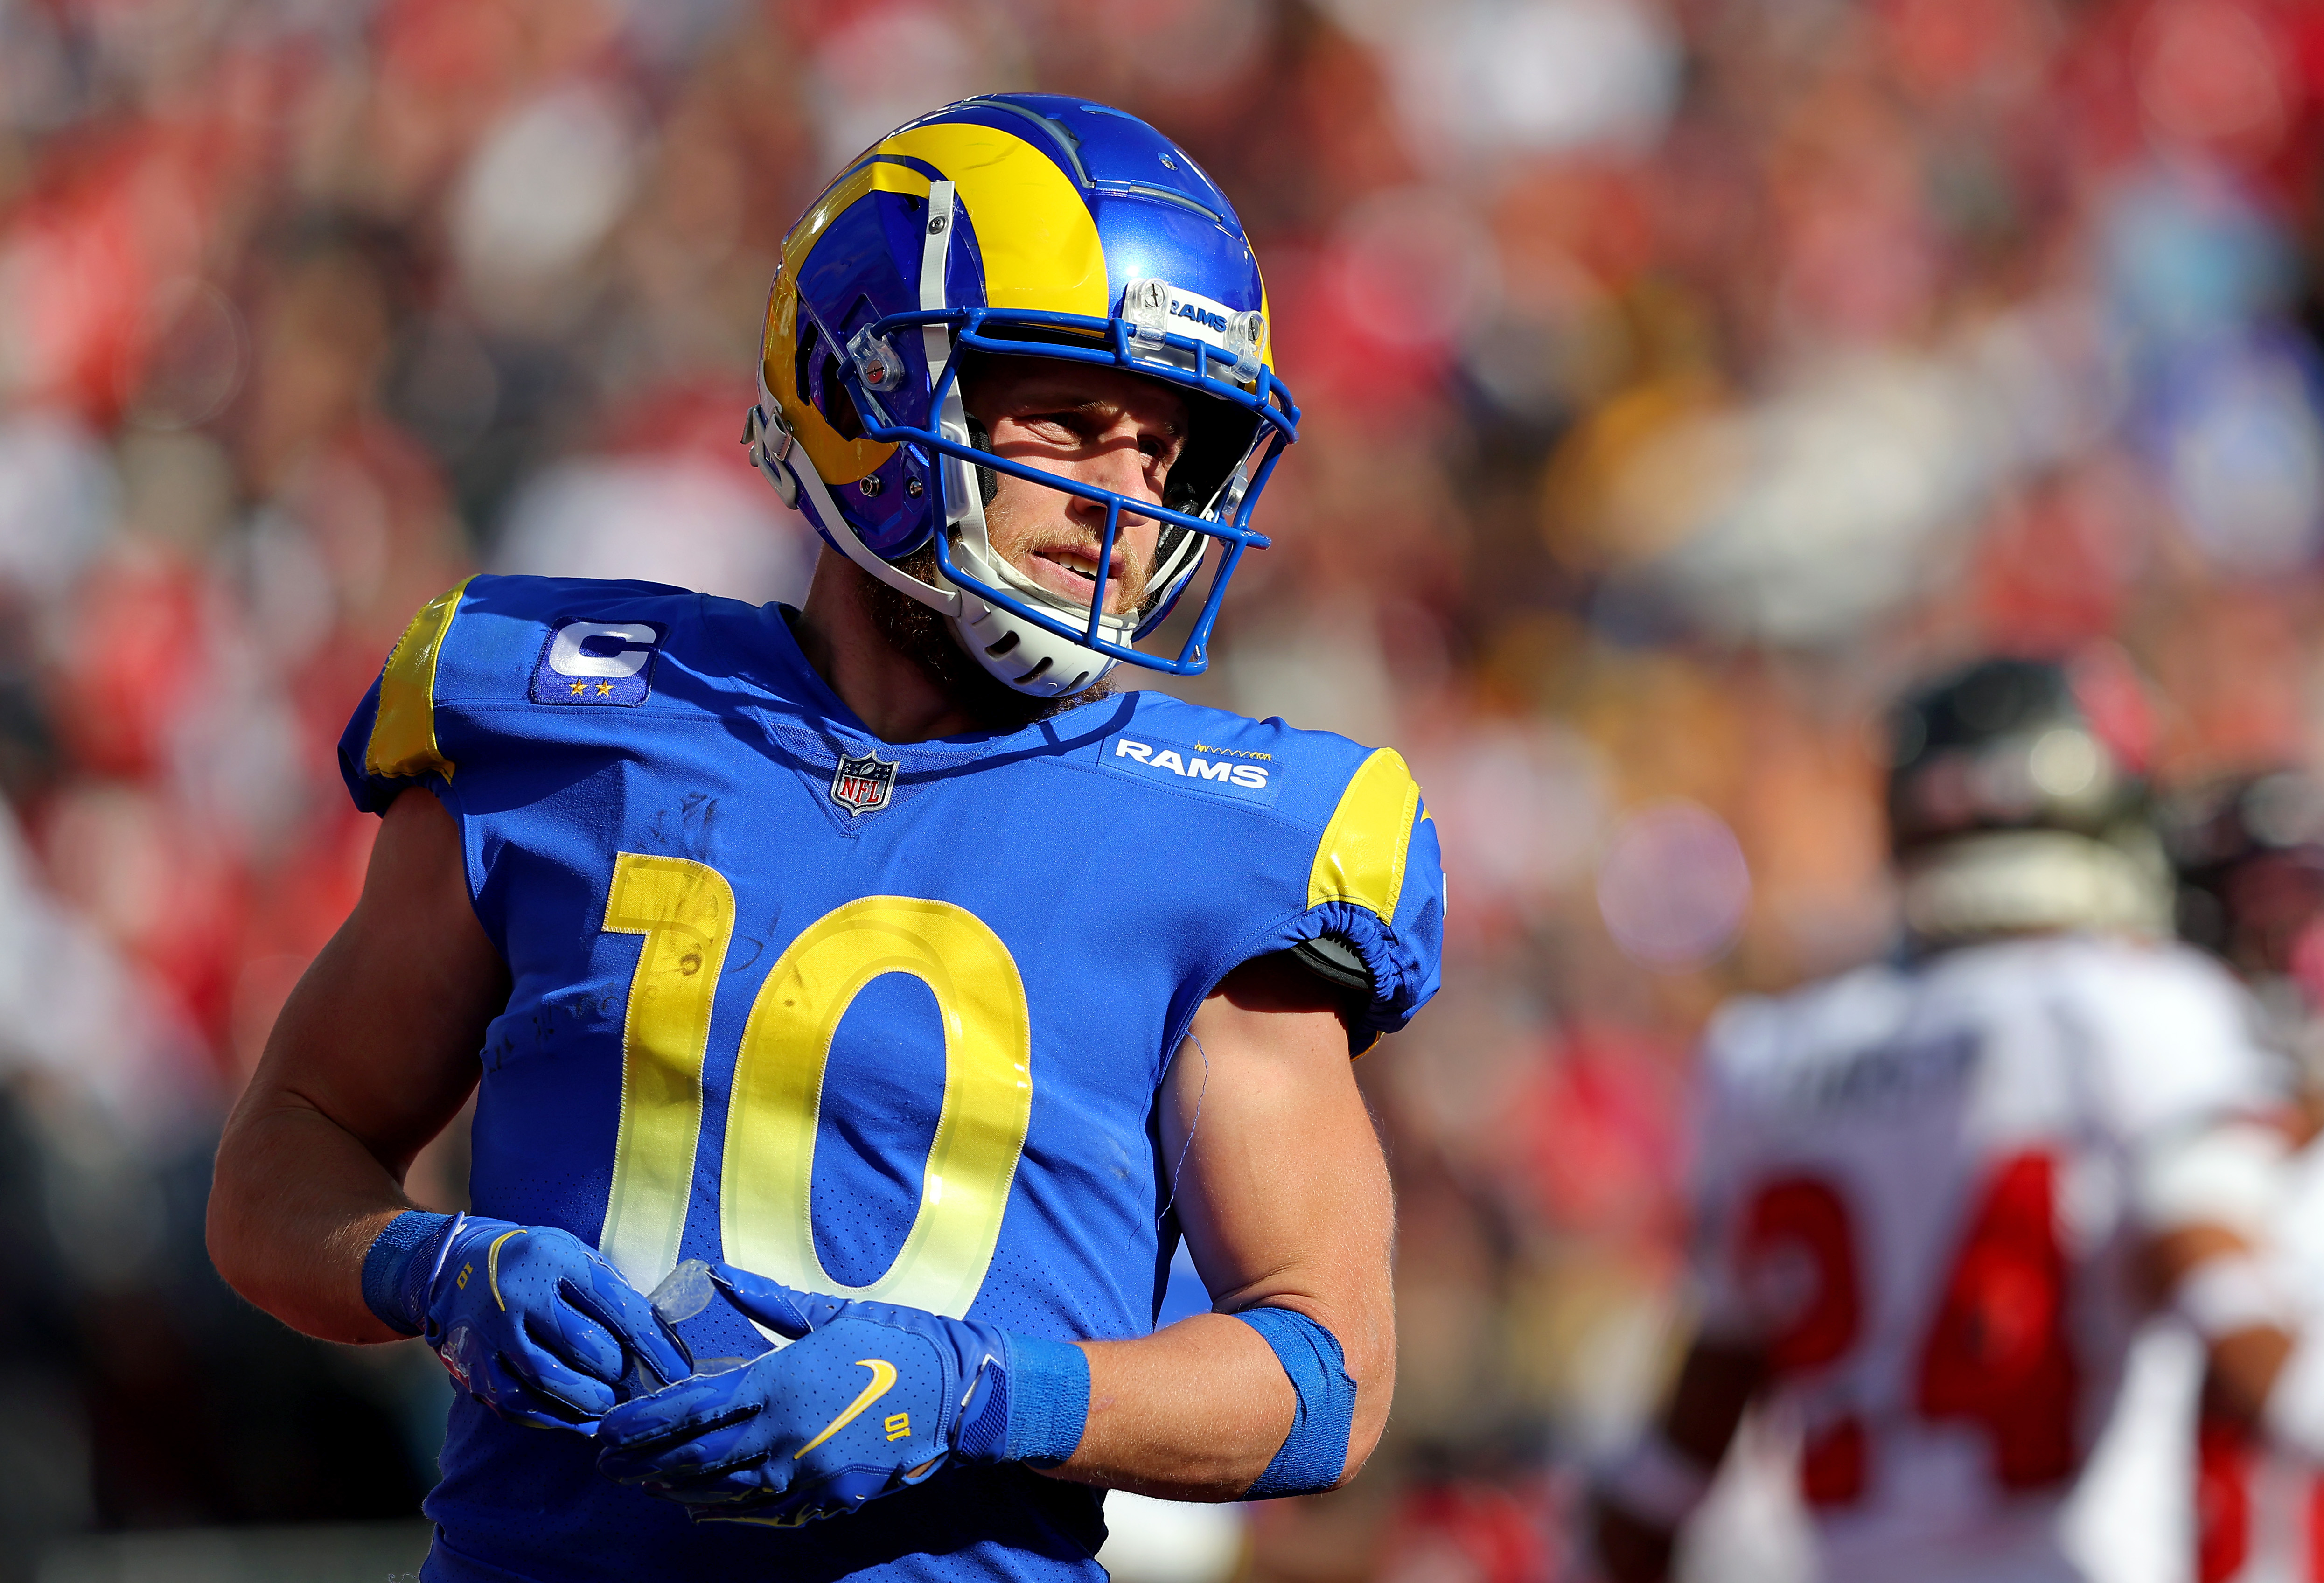 Cooper Kupp #10 of the Los Angeles Rams reacts after scoring a touchdown in the second quarter of the game against the Tampa Bay Buccaneers in the NFC Divisional Playoff game at Raymond James Stadium on January 23, 2022 in Tampa, Florida.